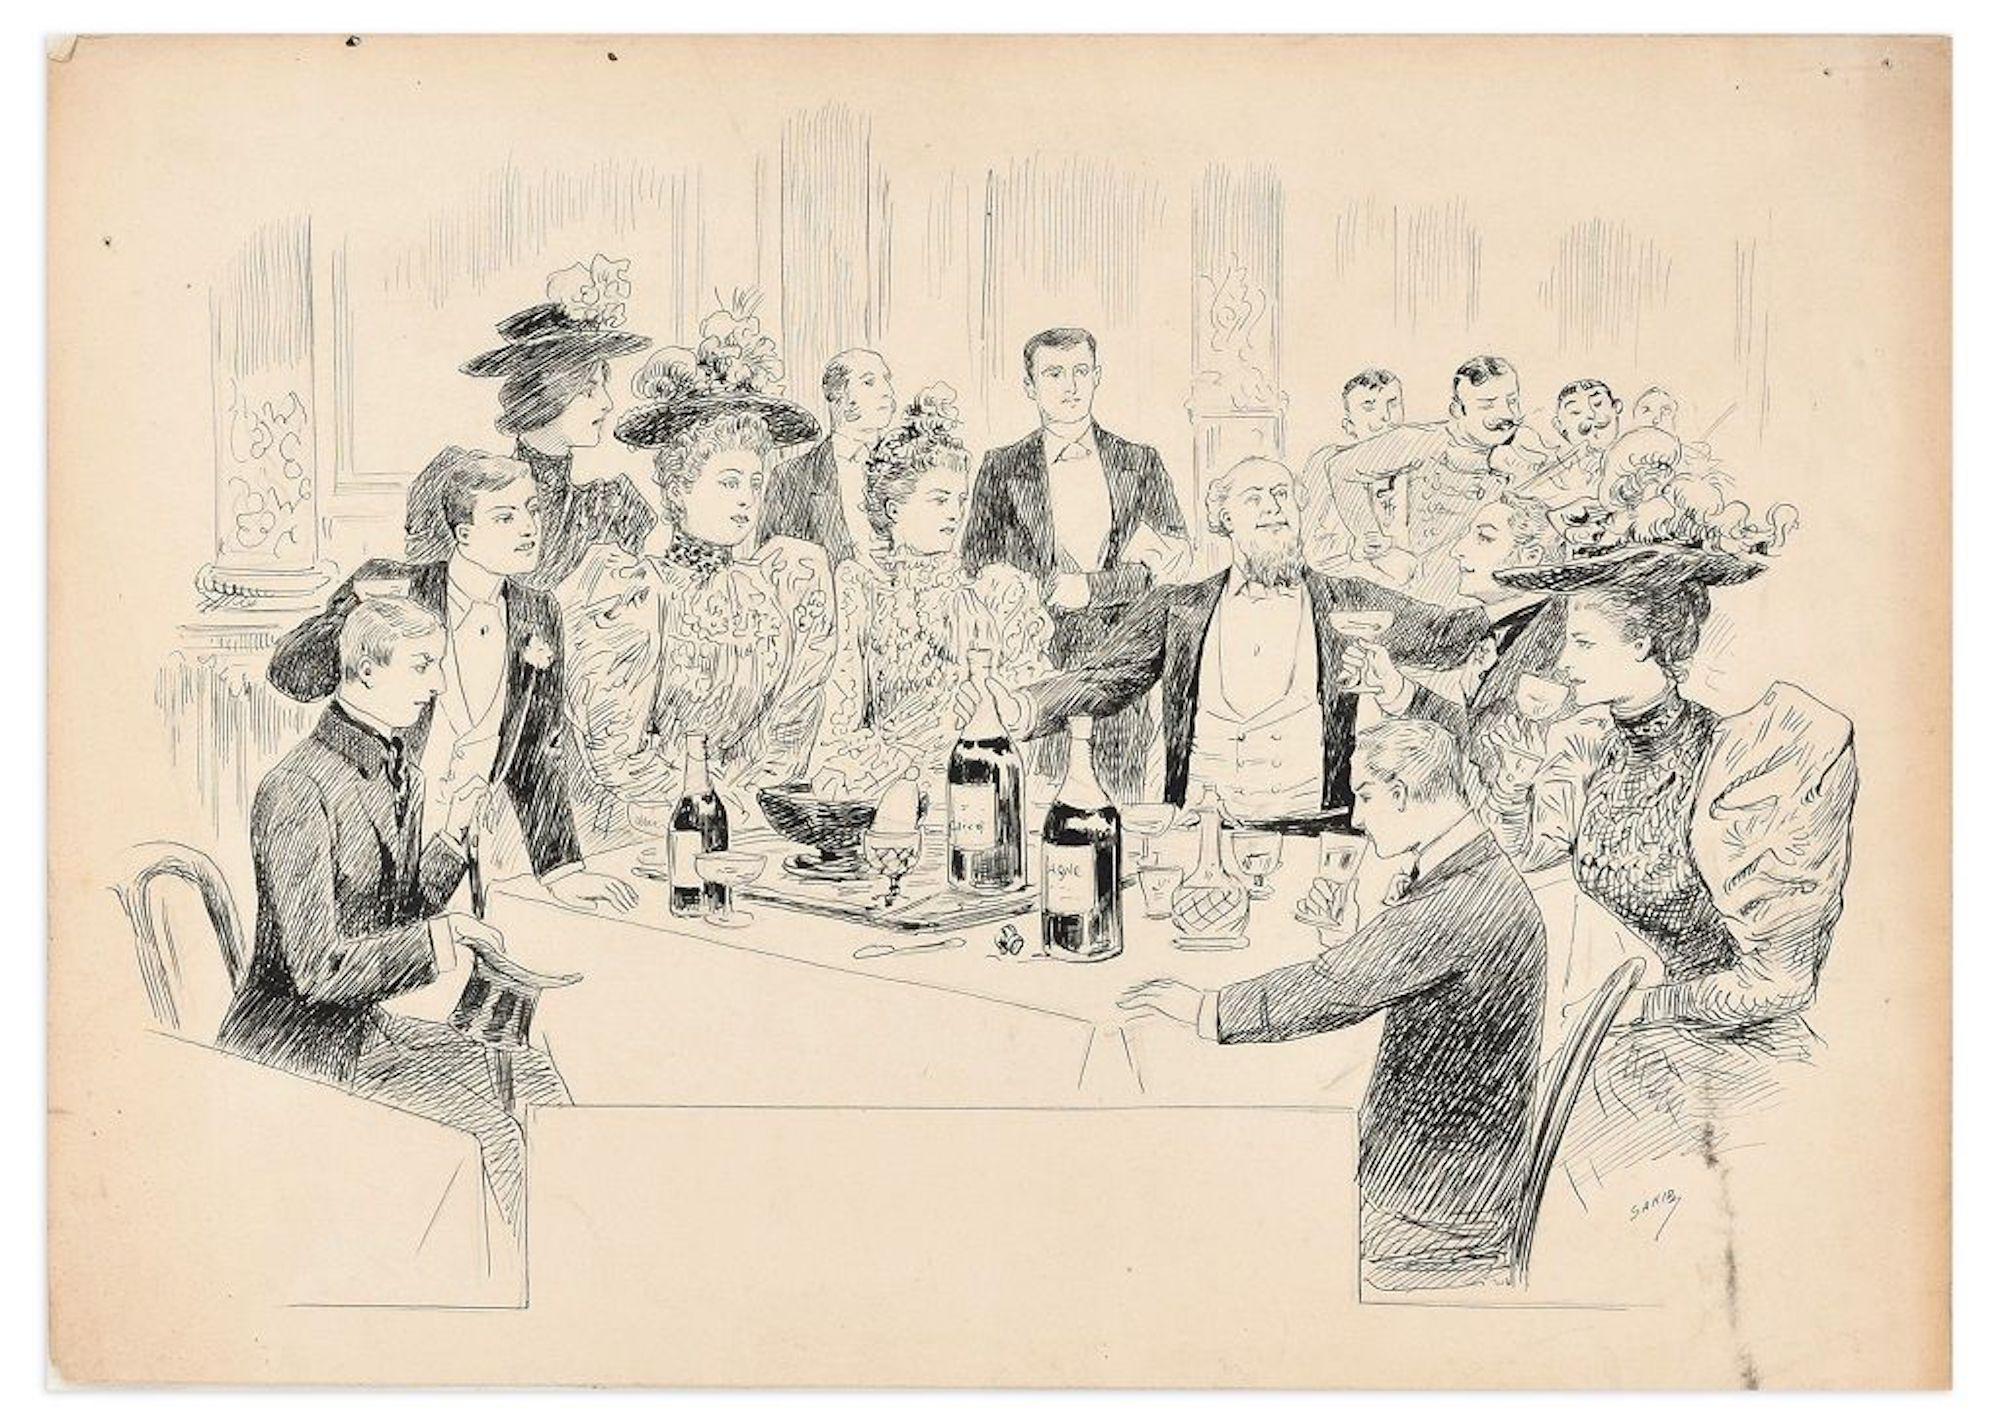 Pierre-Alexis Lesage Figurative Art - The Great Toast - Original China Ink on Paper by P.-A. "Sahib" Lesage -Late 1800